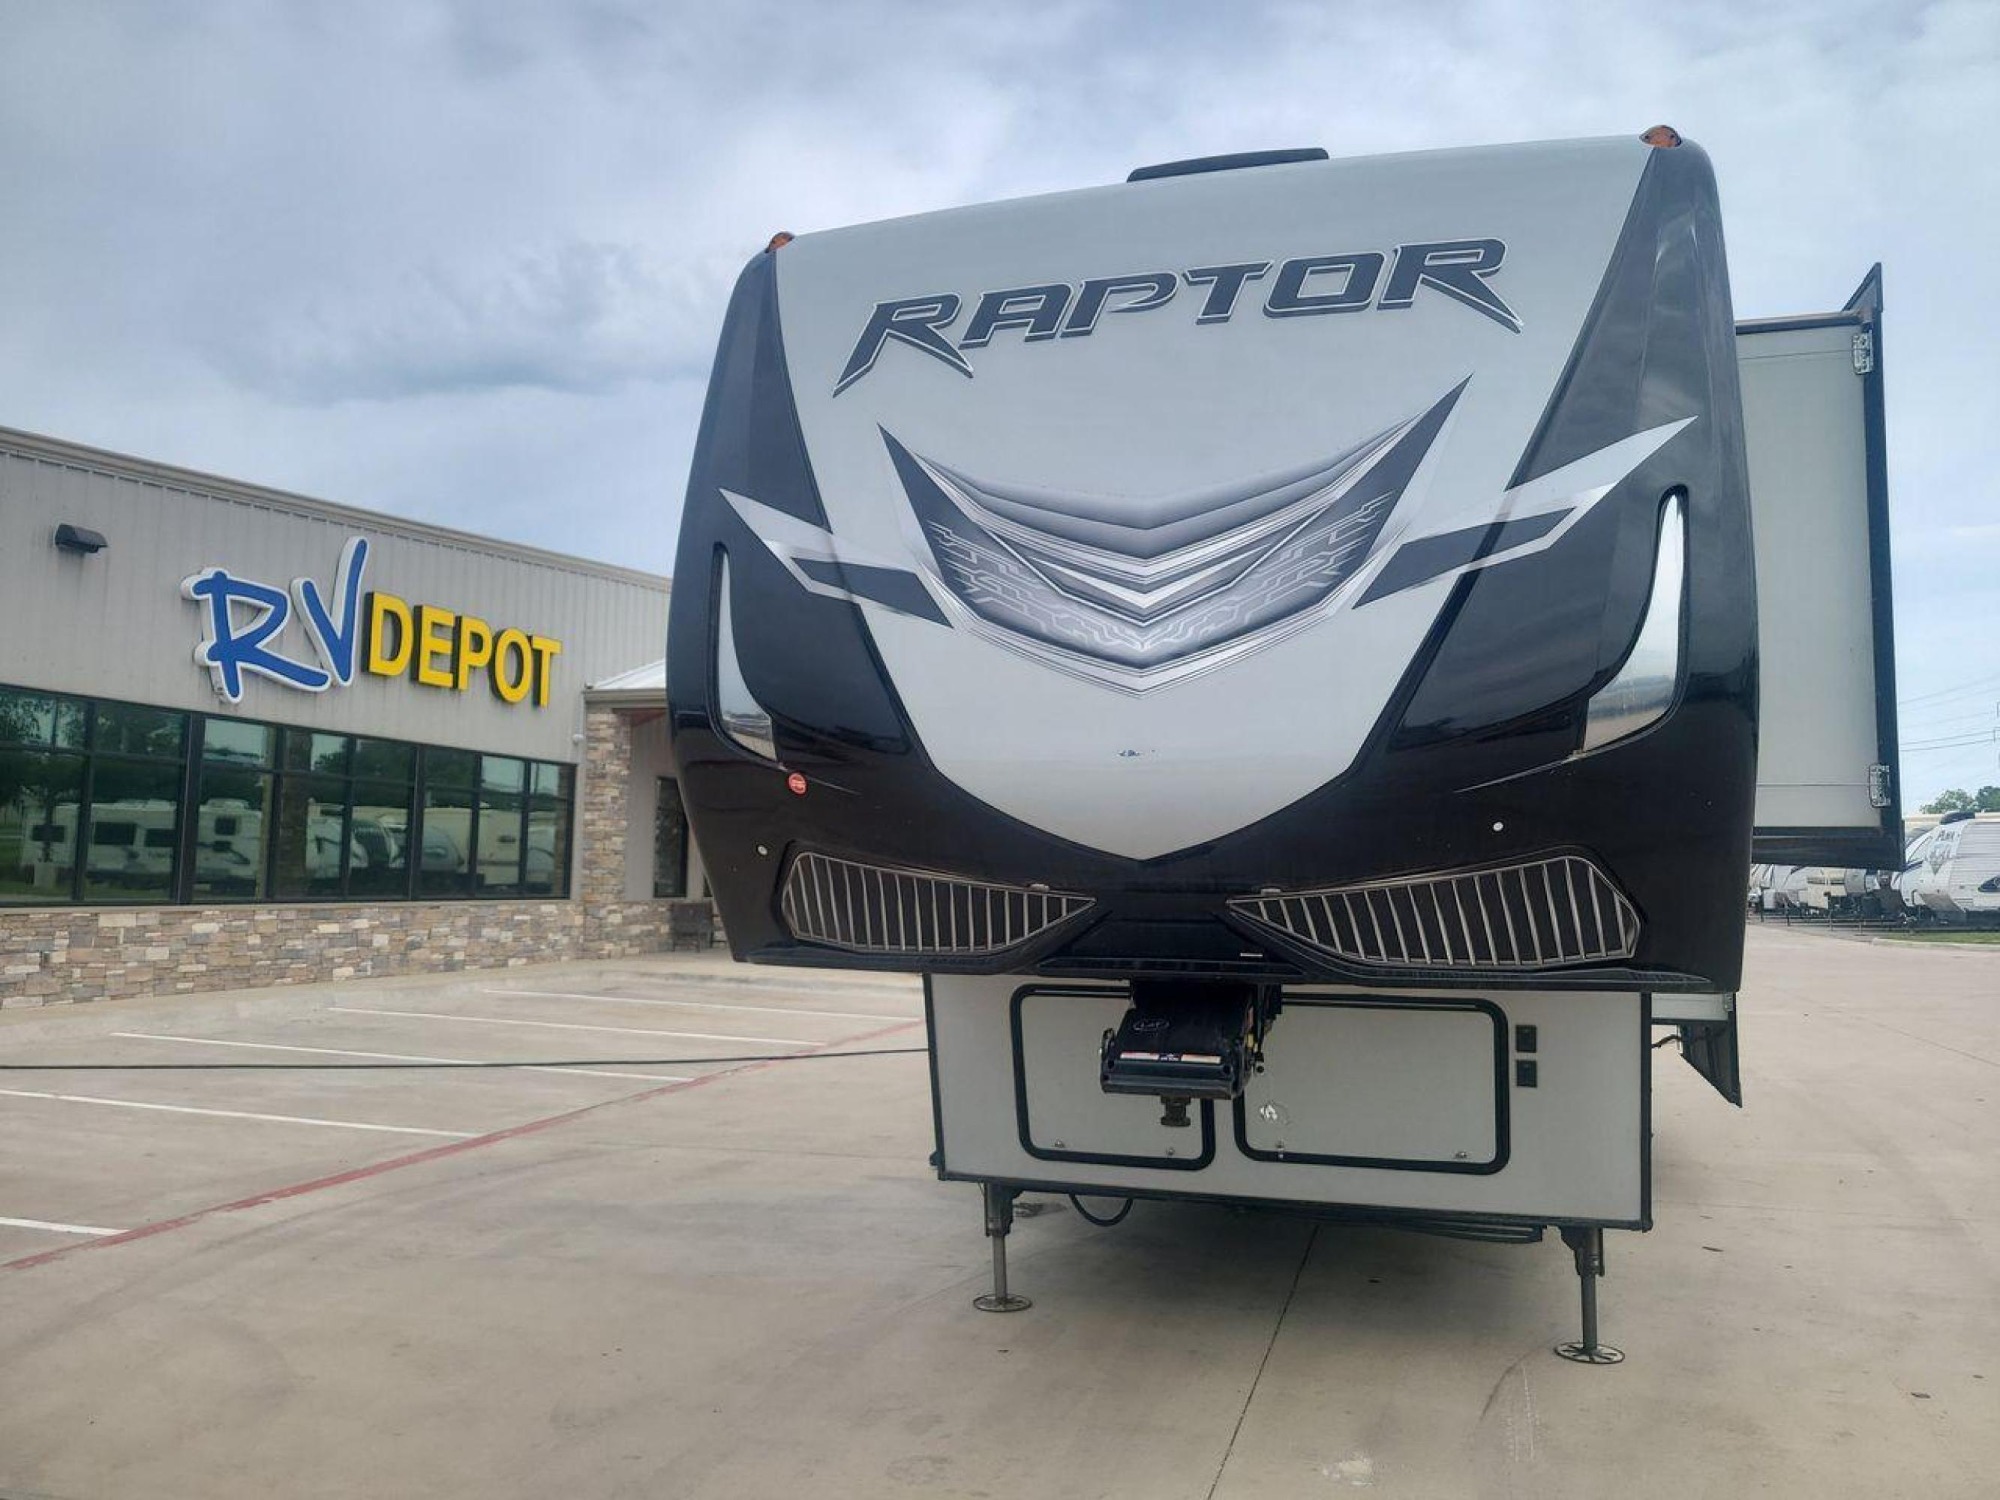 2018 WHITE KEYSTONE RAPTOR 353TS (4YDF35327JR) , Length: 39 ft. | Dry Weight: 13,850 lbs. | Gross Weight: 17,000 lbs. | Slides: 3 transmission, located at 4319 N Main St, Cleburne, TX, 76033, (817) 678-5133, 32.385960, -97.391212 - This 2018 Keystone Raptor 353TS measures 39 feet. It is a dual axle, aluminum wheel setup with hydraulic drum brakes. Its dry weight is 13,850 lbs; its payload capacity is 3,150 lbs, its hitch weight is 3,200 lbs, and the GVWR is 17,000 lbs. The fiberglass exterior is painted tan with black, white, - Photo #1